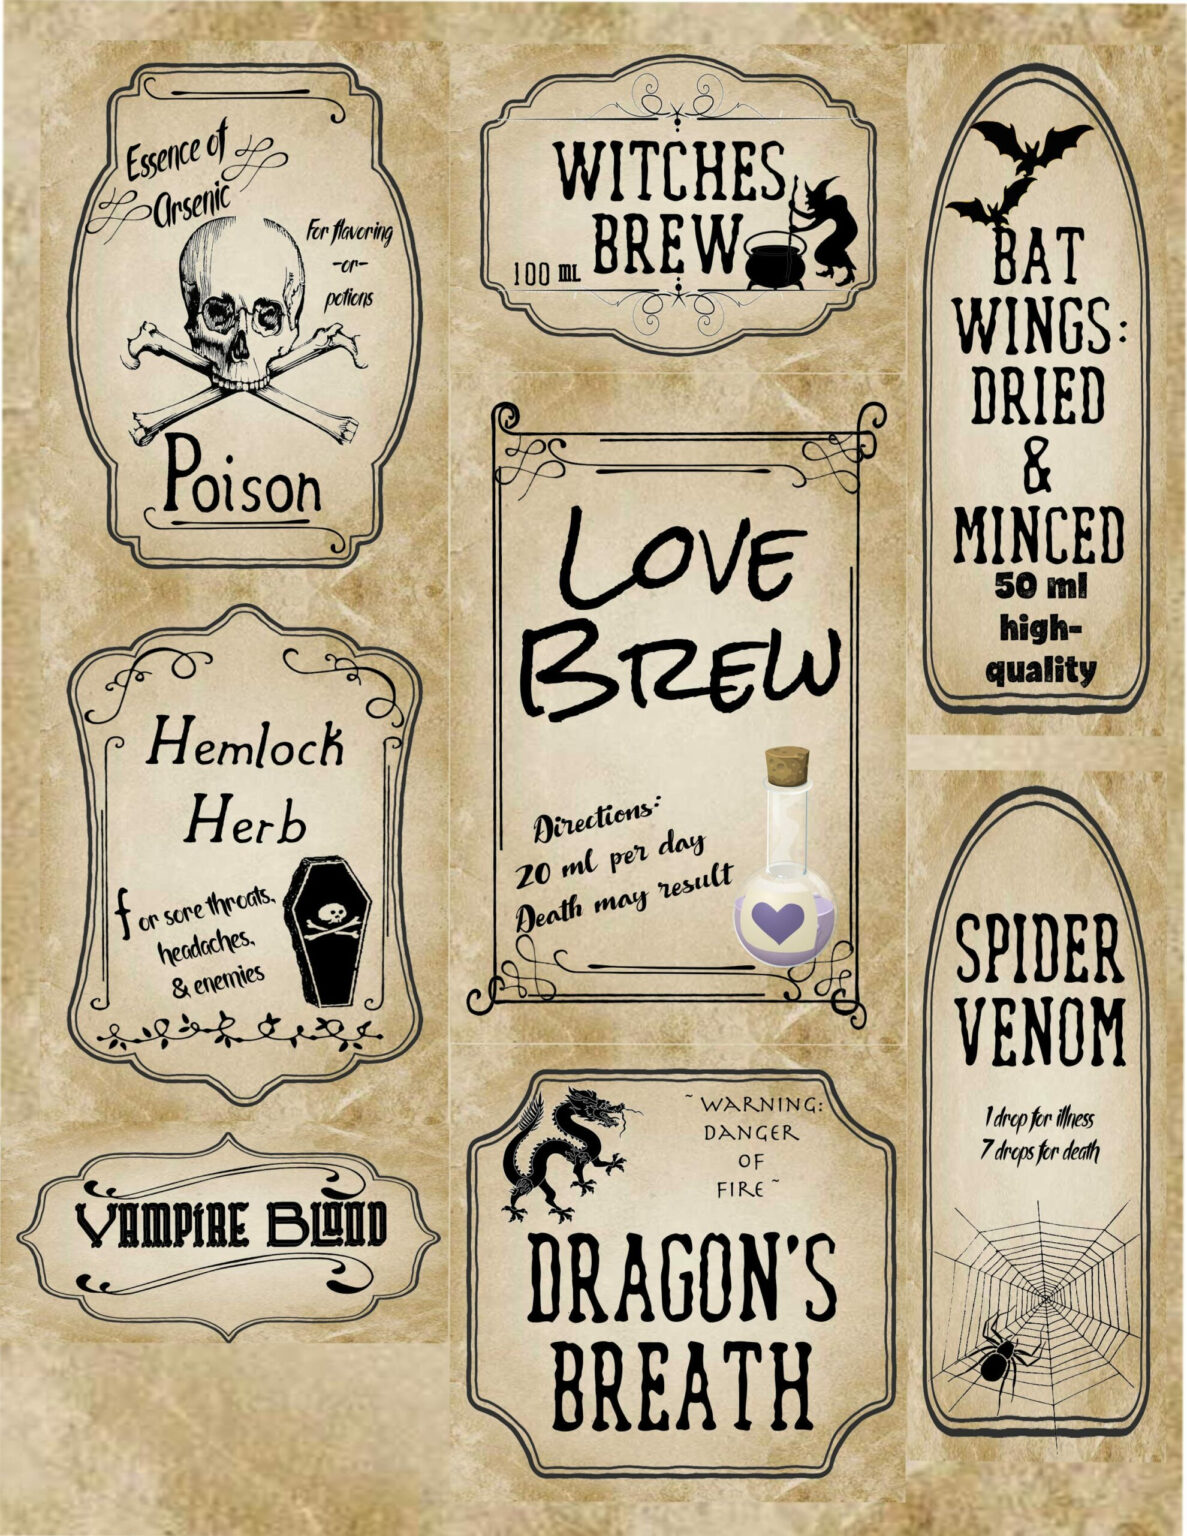 Apothecary Label Template Colonarsd7 Throughout Harry Potter Potion Labels Templates Best